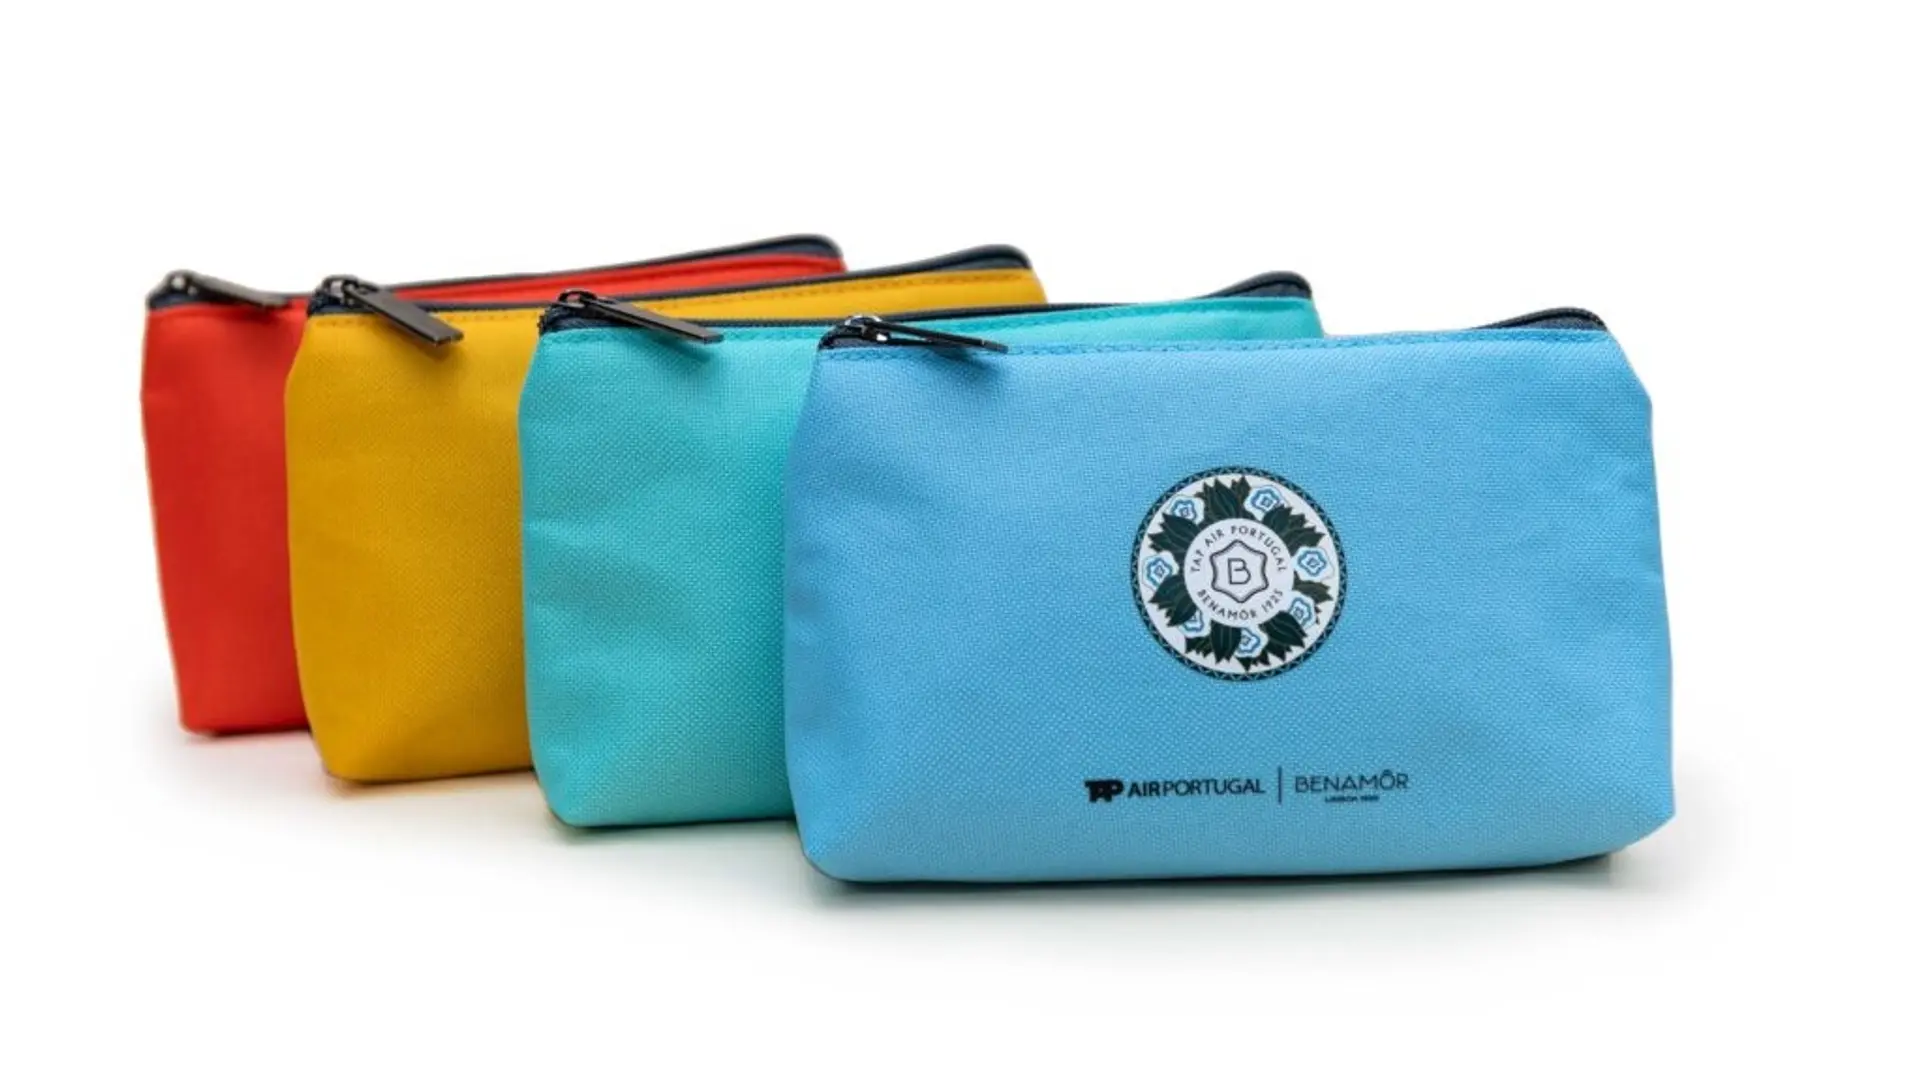 Airlines News - TAP's new Benamôr amenity kits unveiled